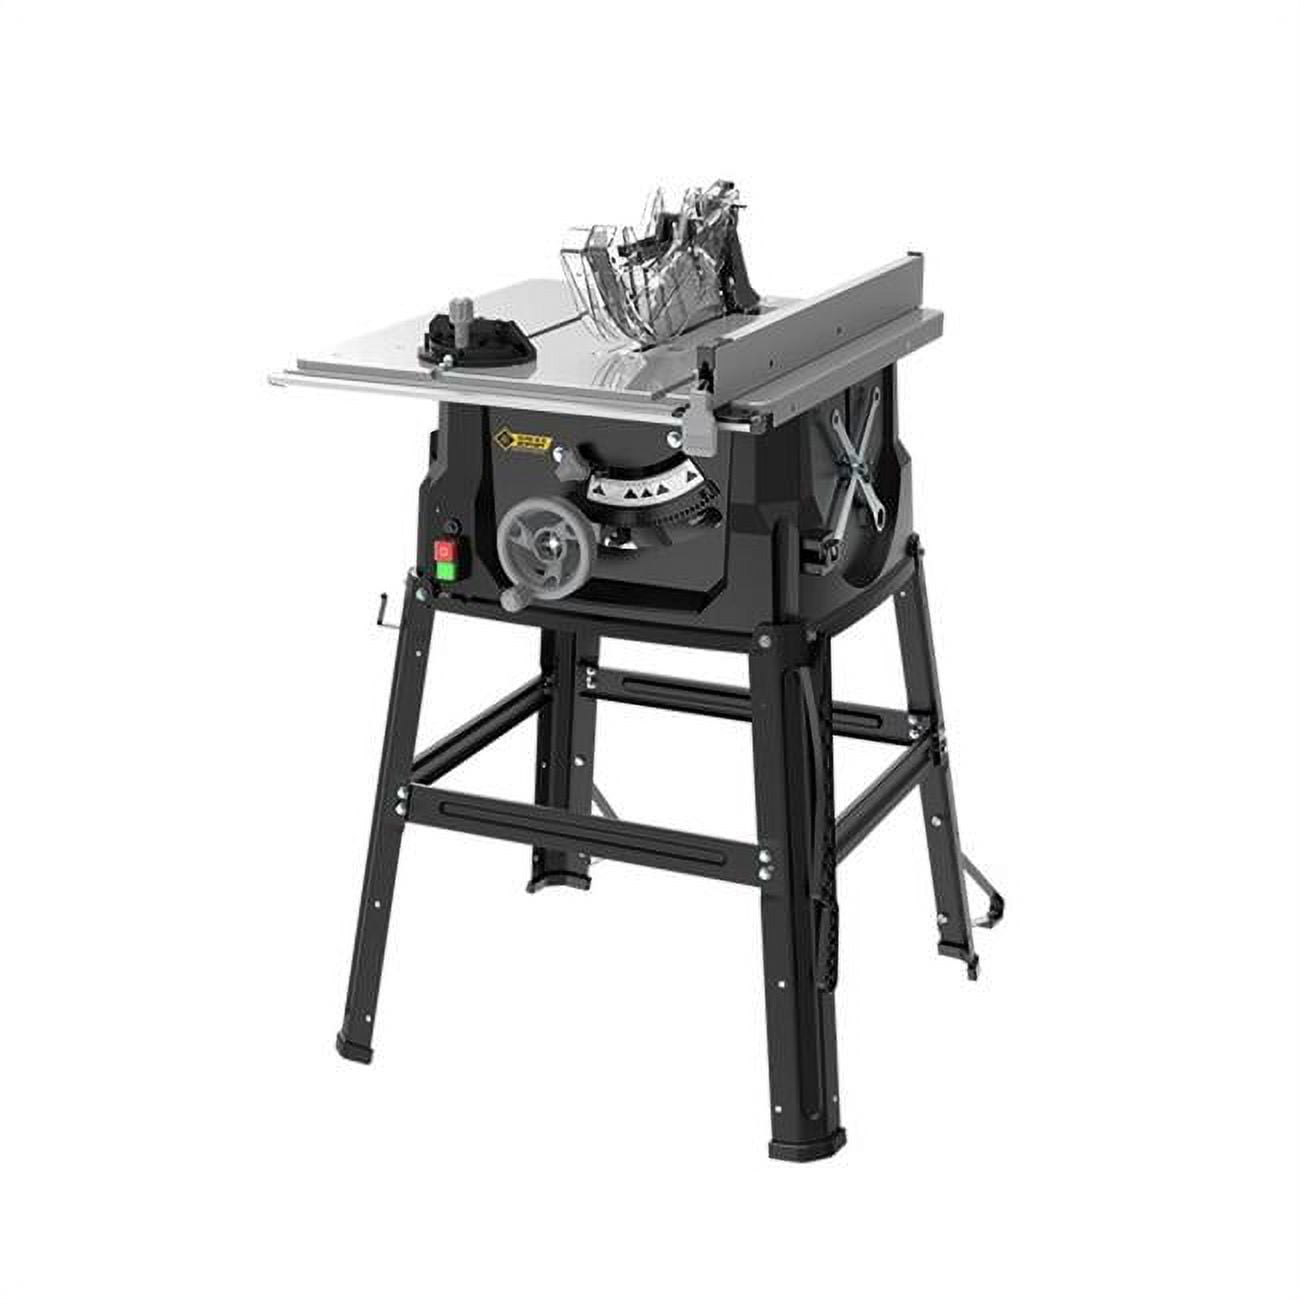 2006397 15A  Corded Table Saw with Stand -  Steel Grip, M1H-ZP3-25